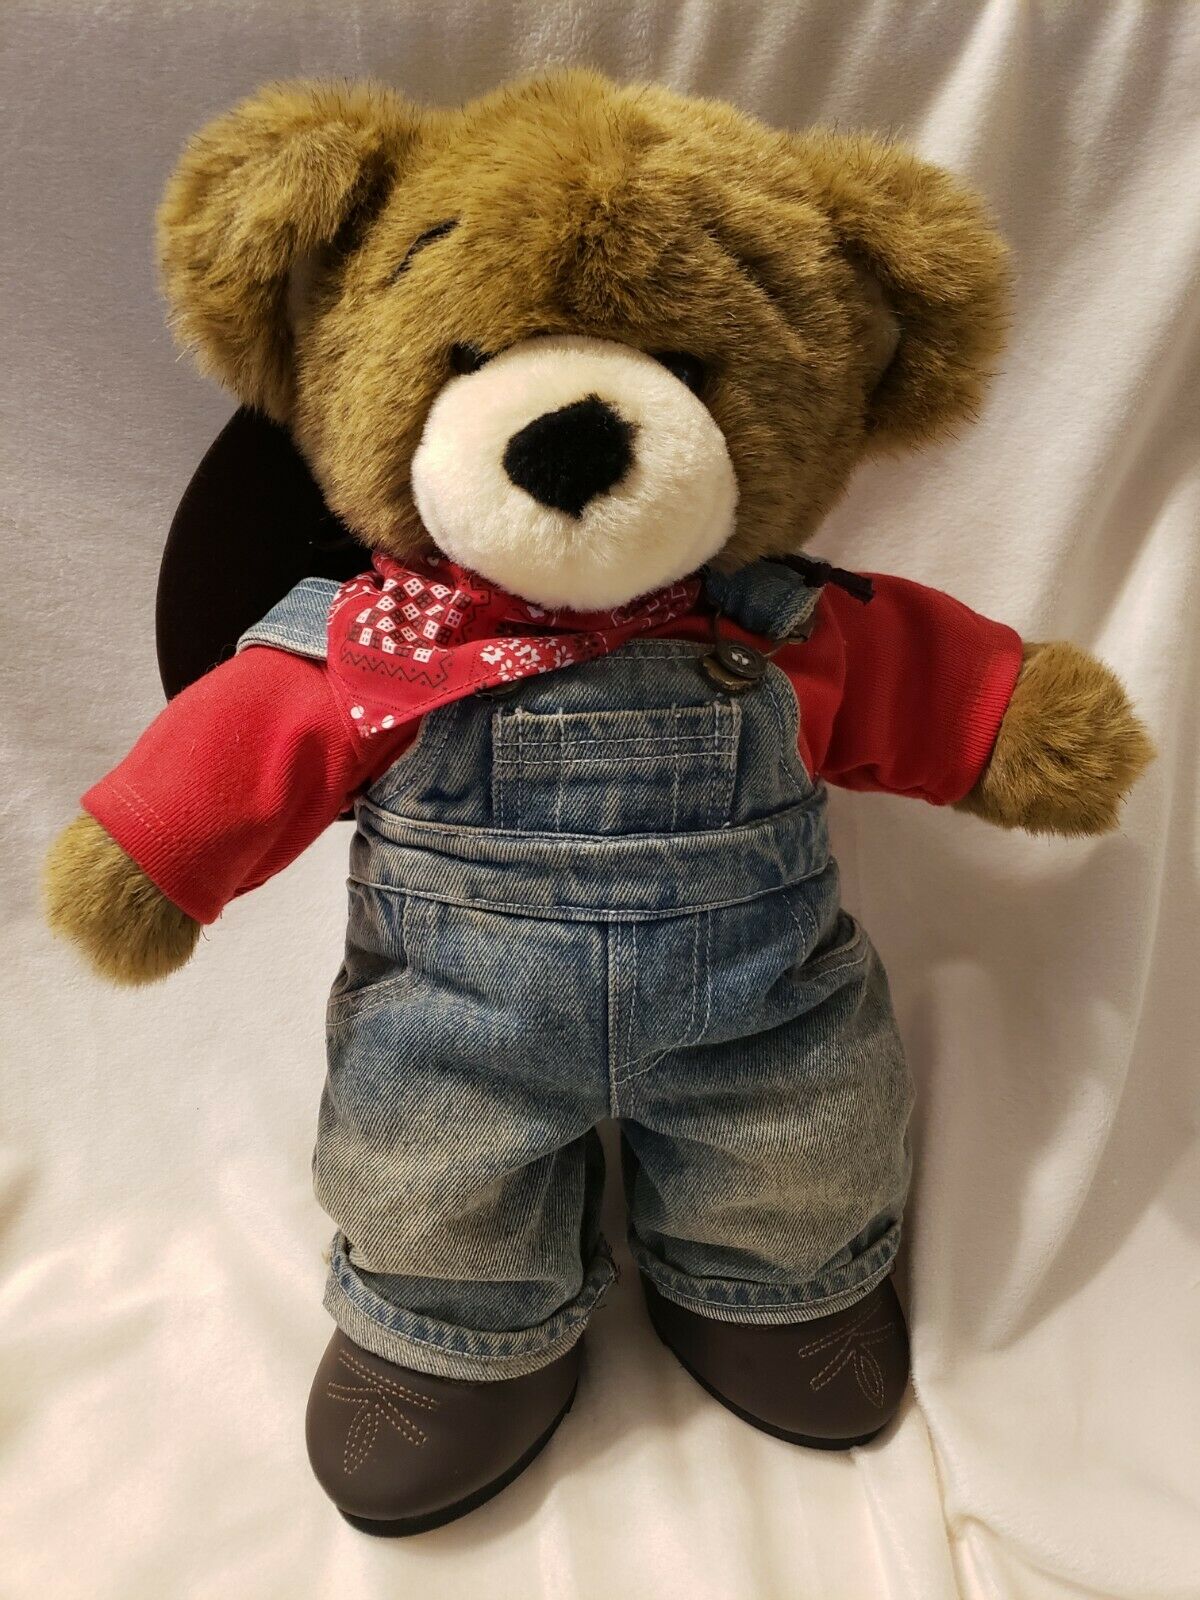 Build-a-bear Cowboy Teddy Bear With Outfit, Cowboy Boots, Overalls, Hat, Bandana